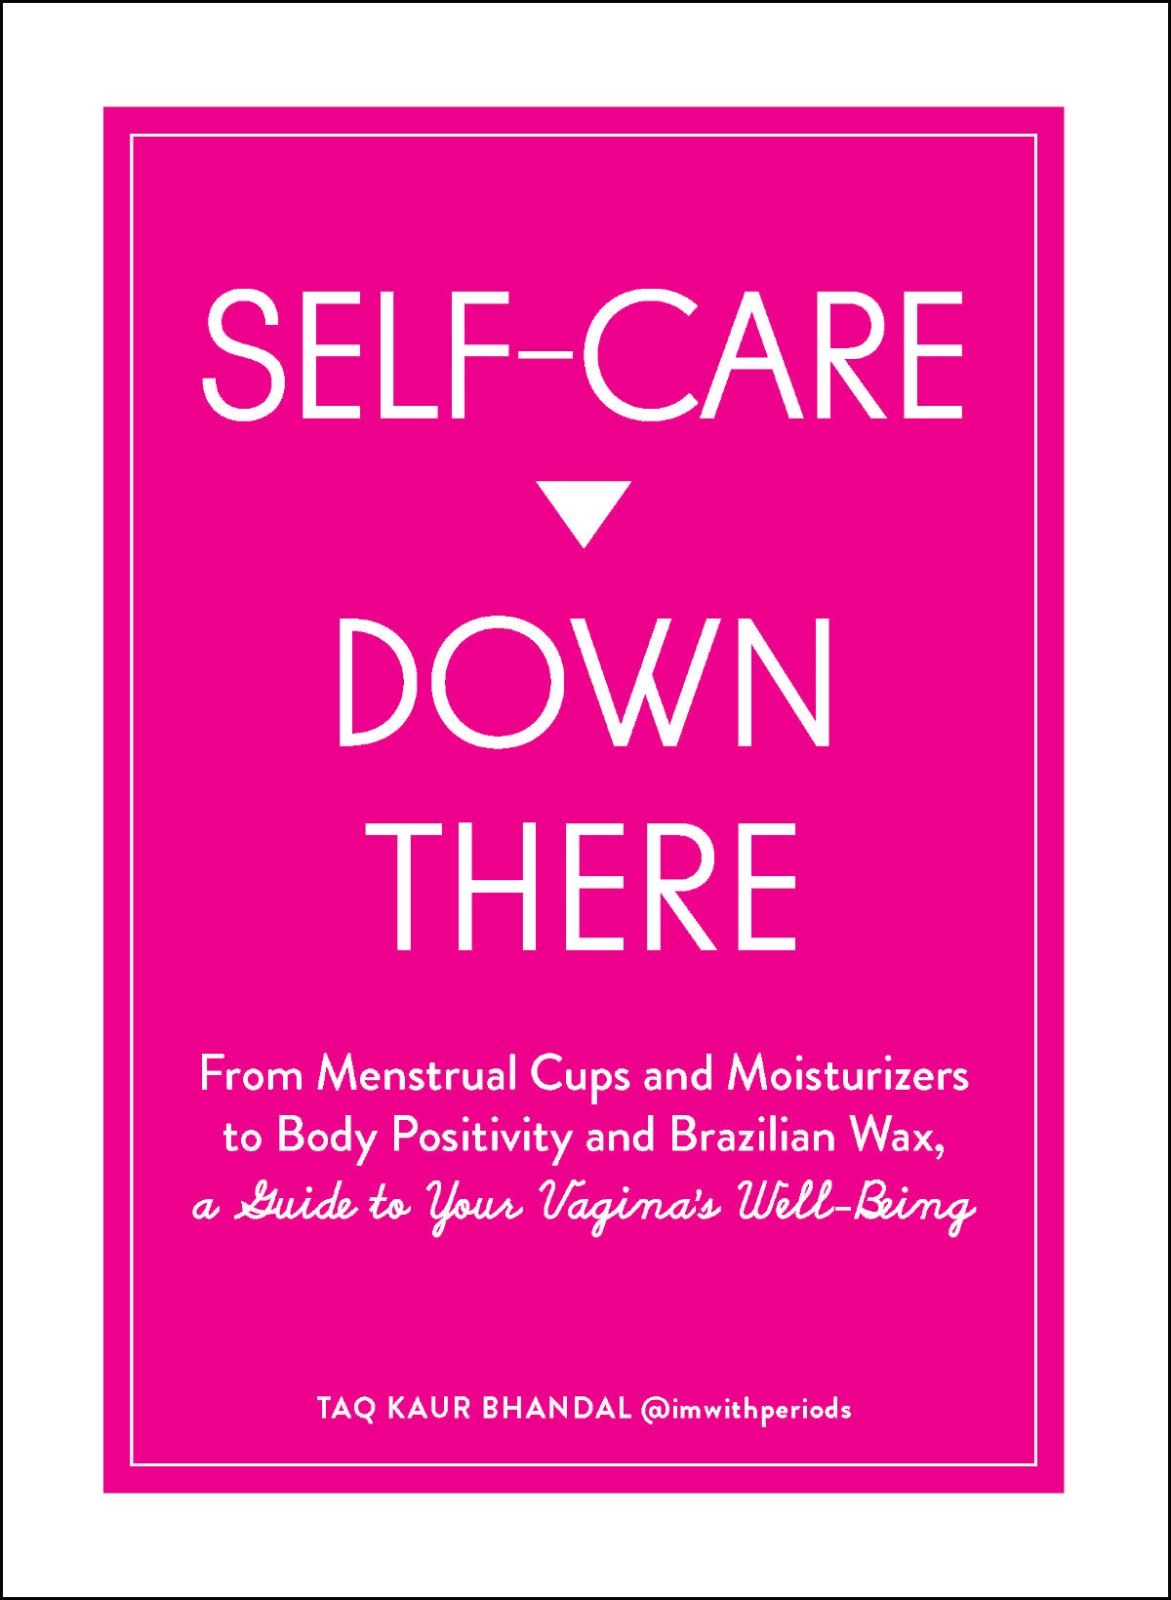 Self Care Down There: A GT Your Vagina's Well-Being - Books and Games